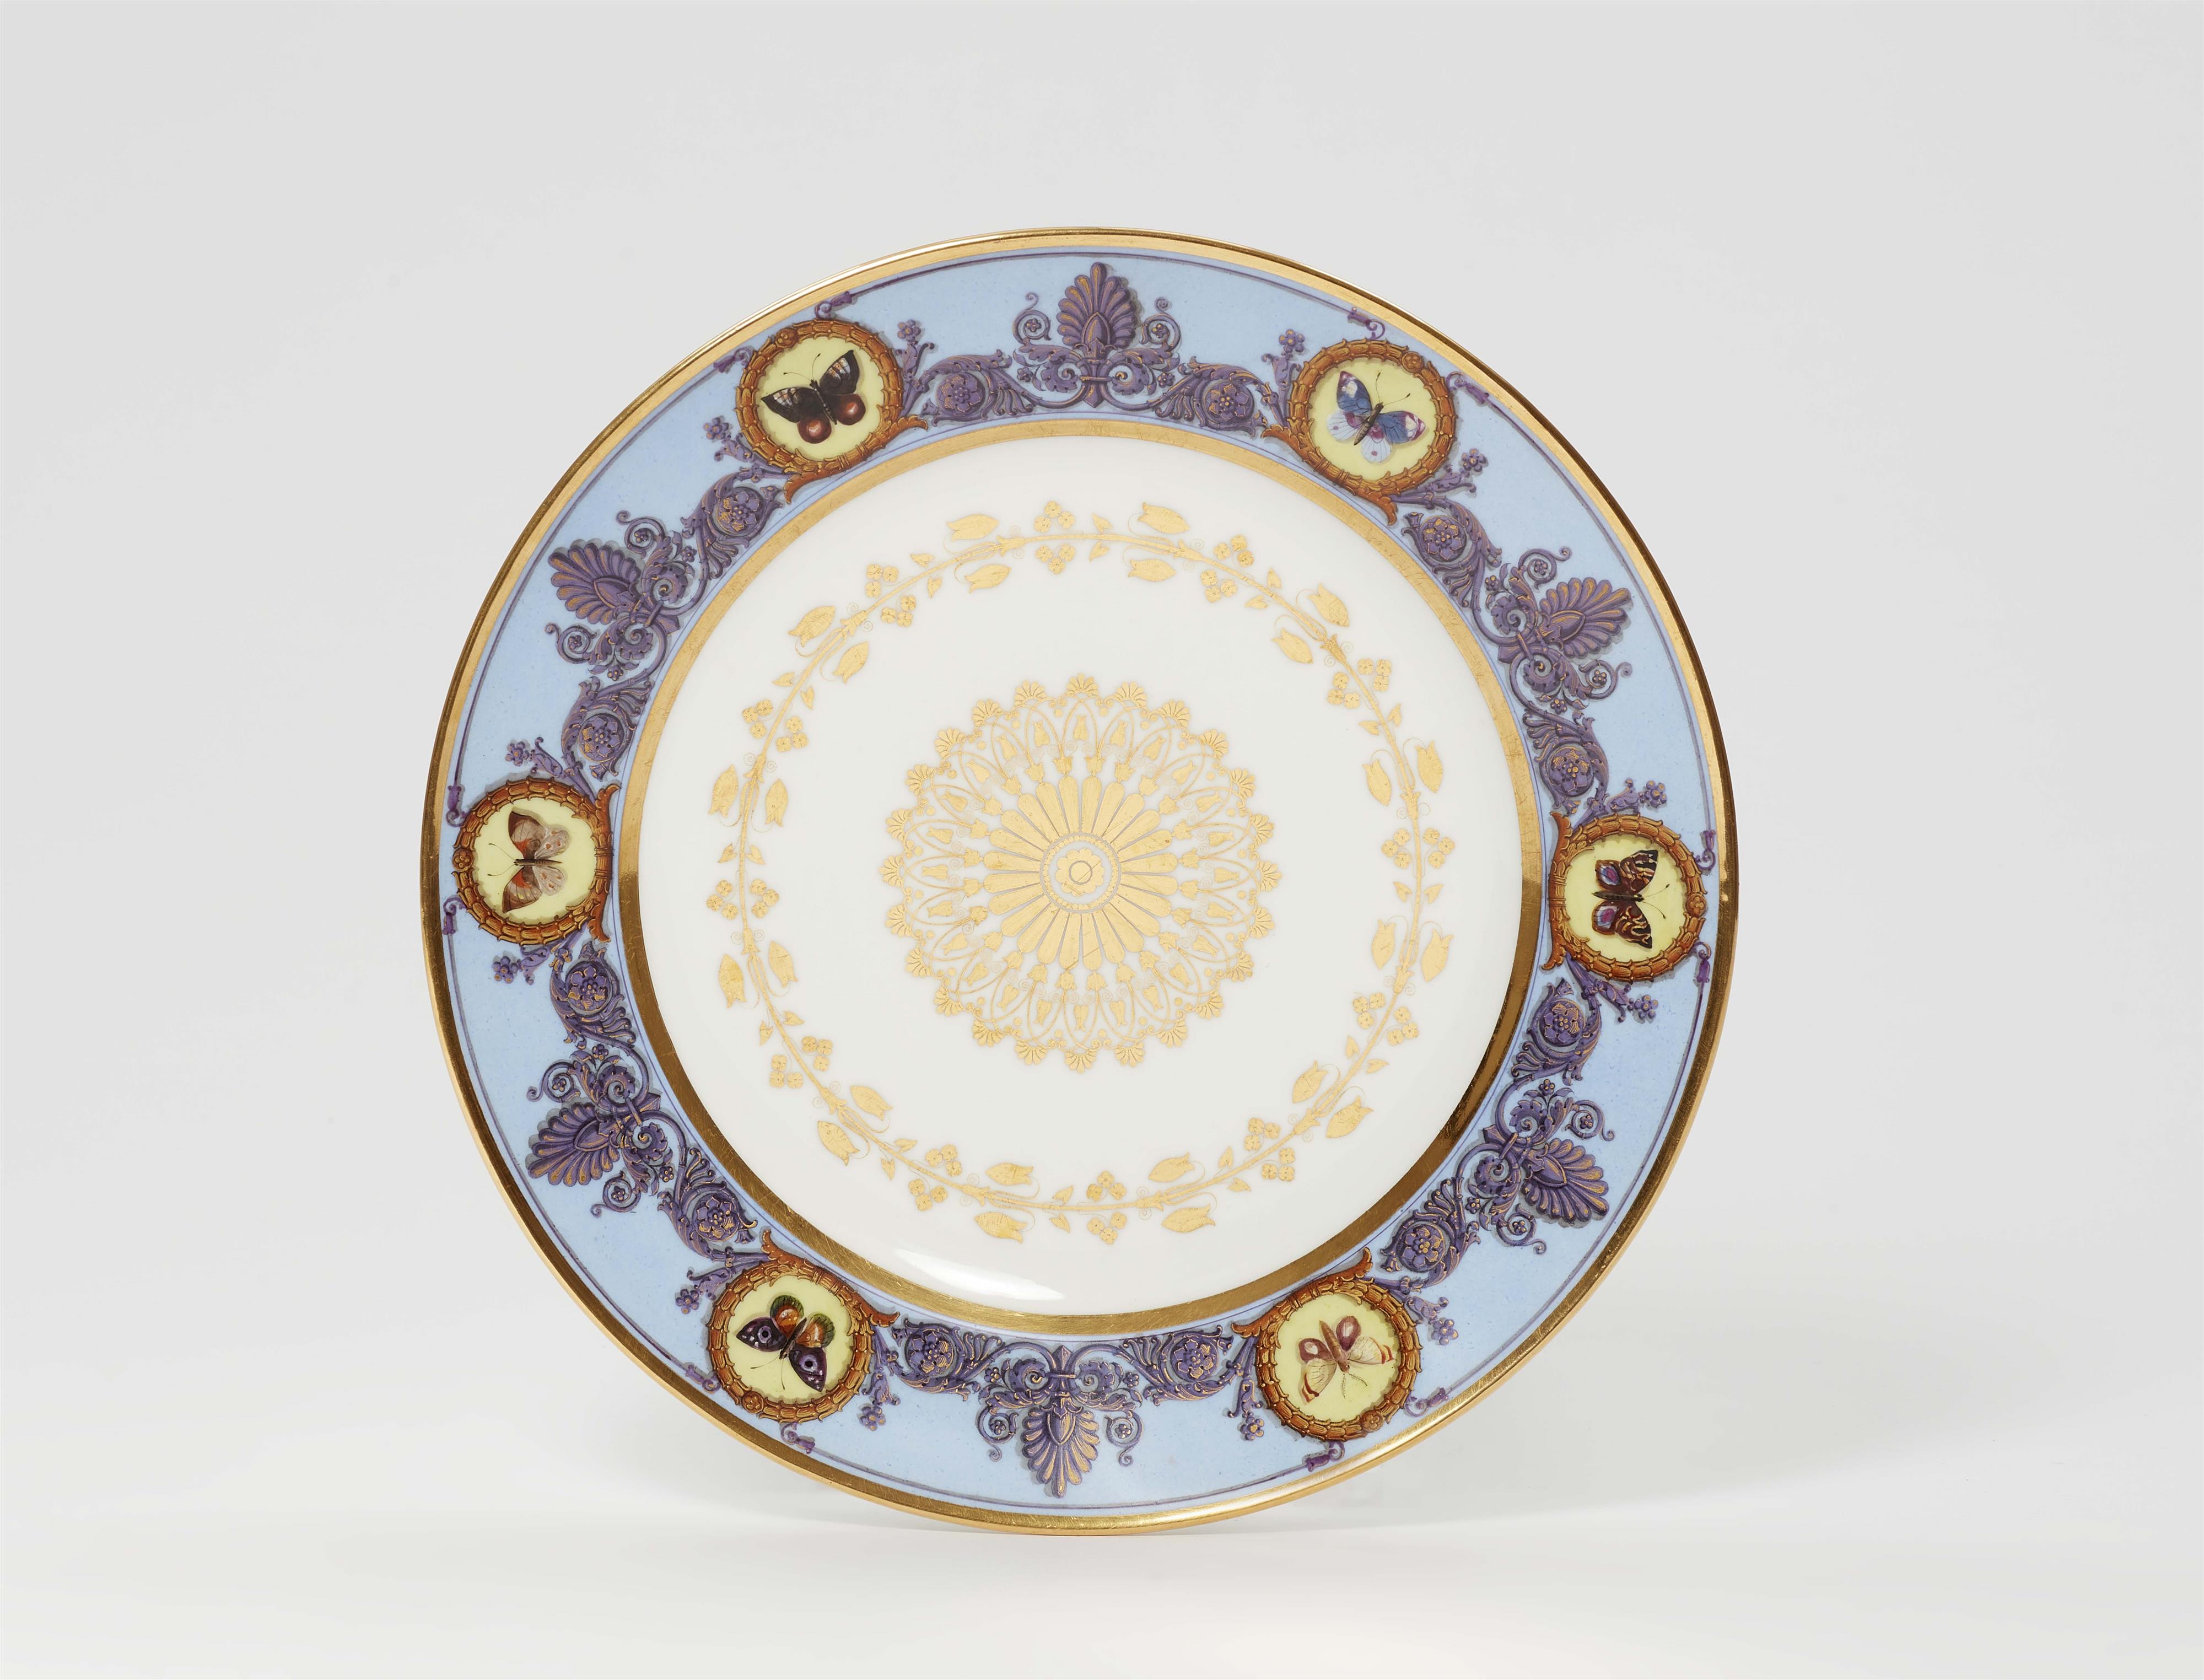 A rare Sèvres porcelain plate from a dinner service with palmettes and butterflies - image-1